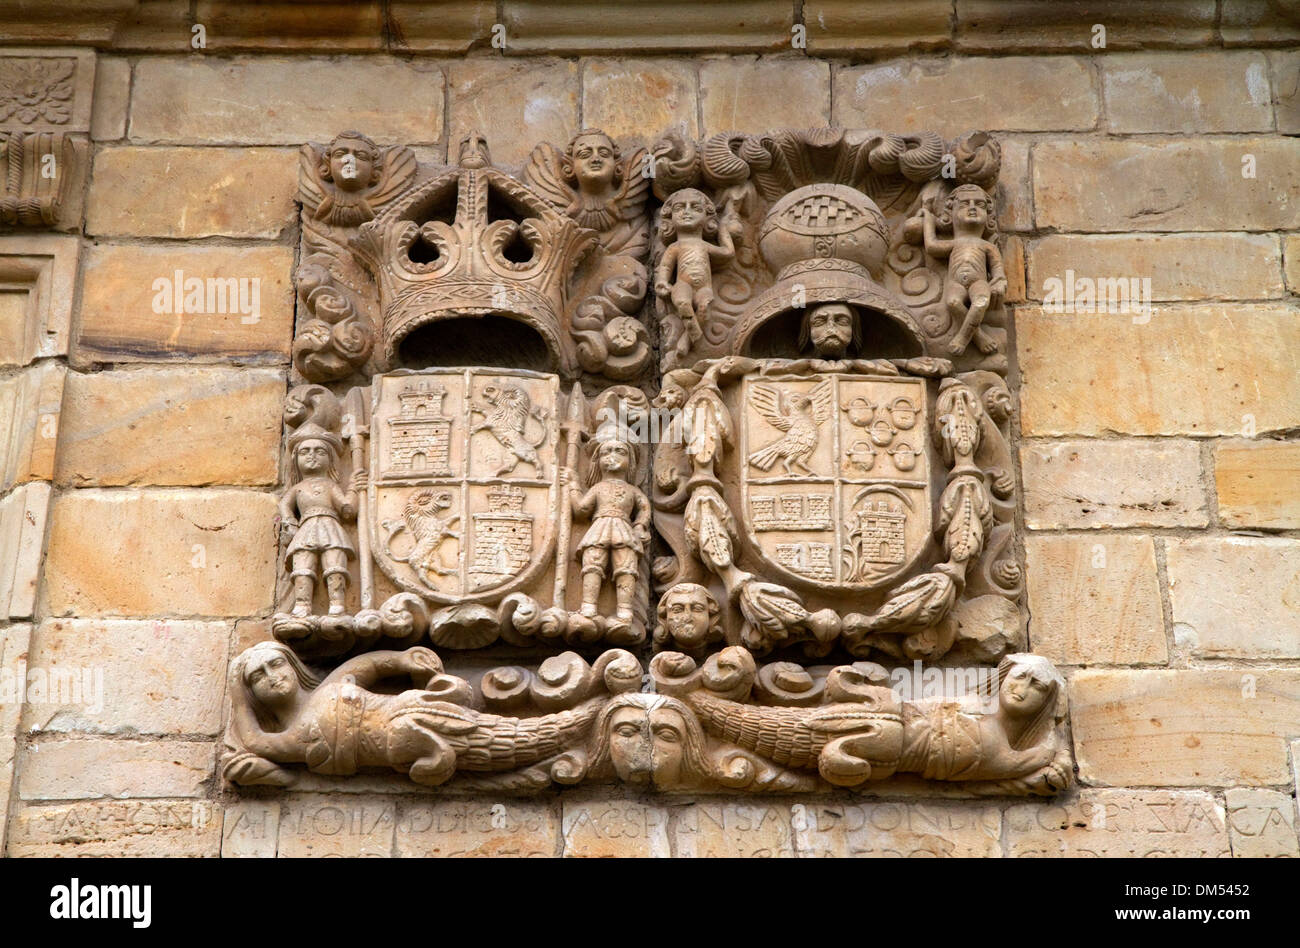 Coat of arms carved in the stone wall of the Hotel los Infantes at Santillana del Mar, Cantabria, Spain. Stock Photo